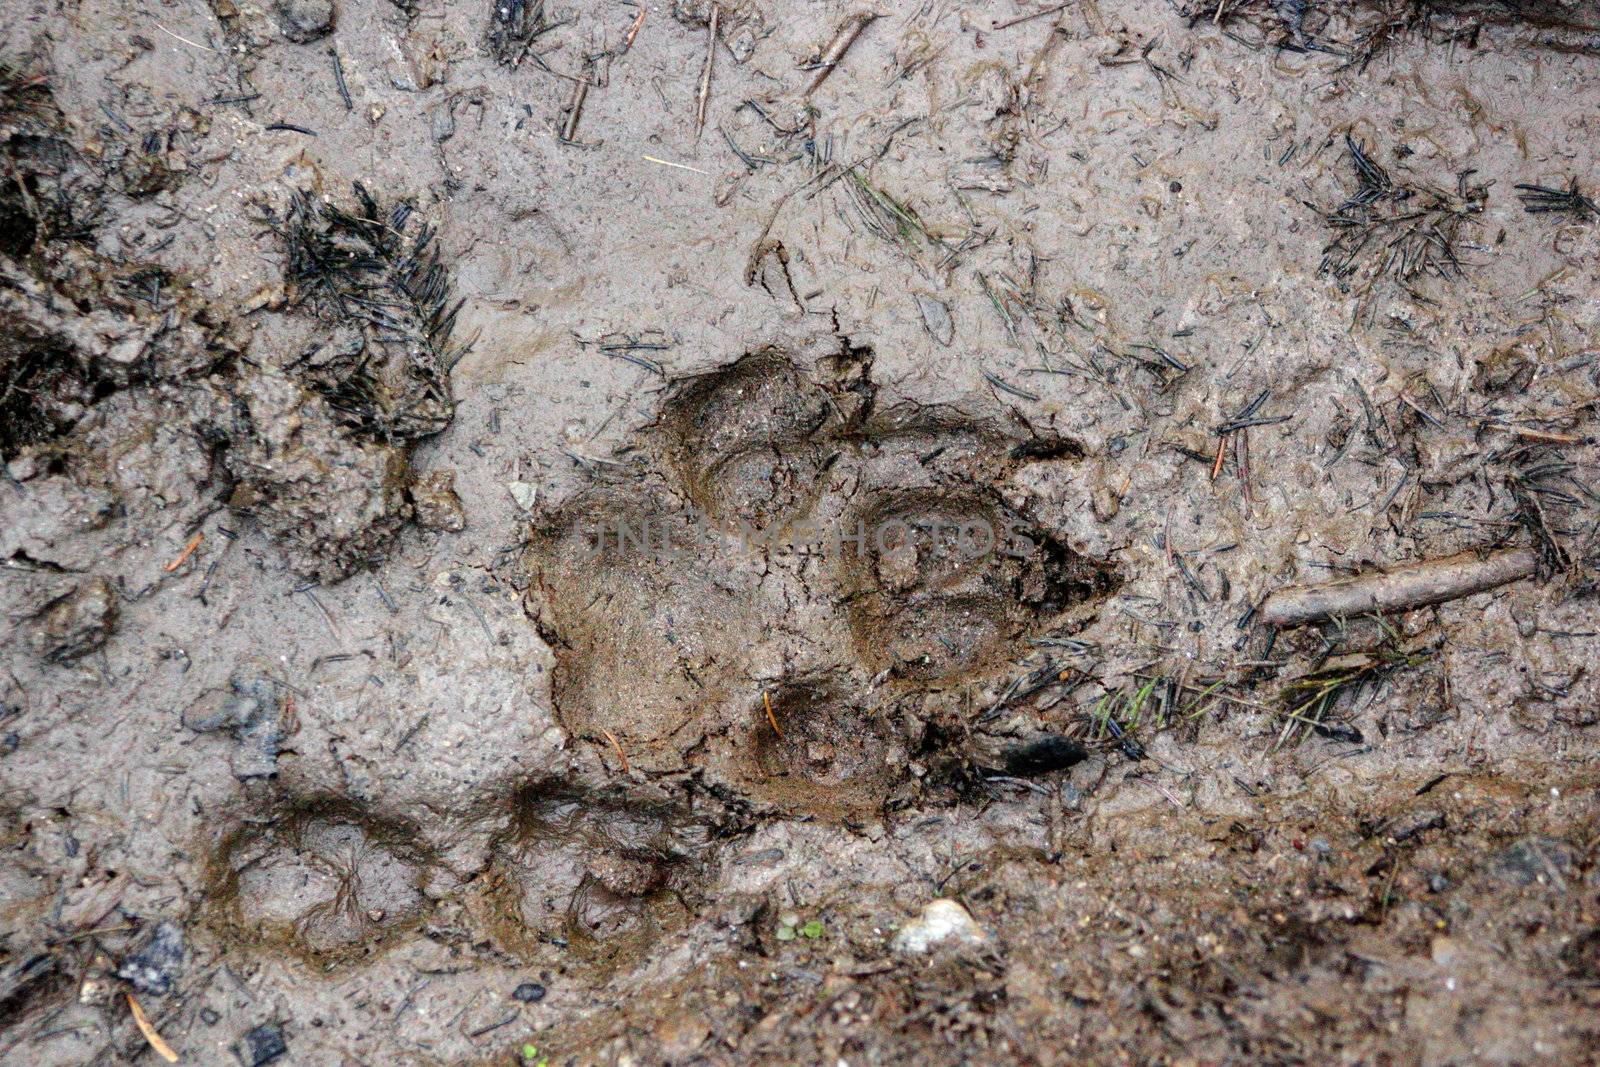 comparison between a wolf and a fox track that I found in the mud